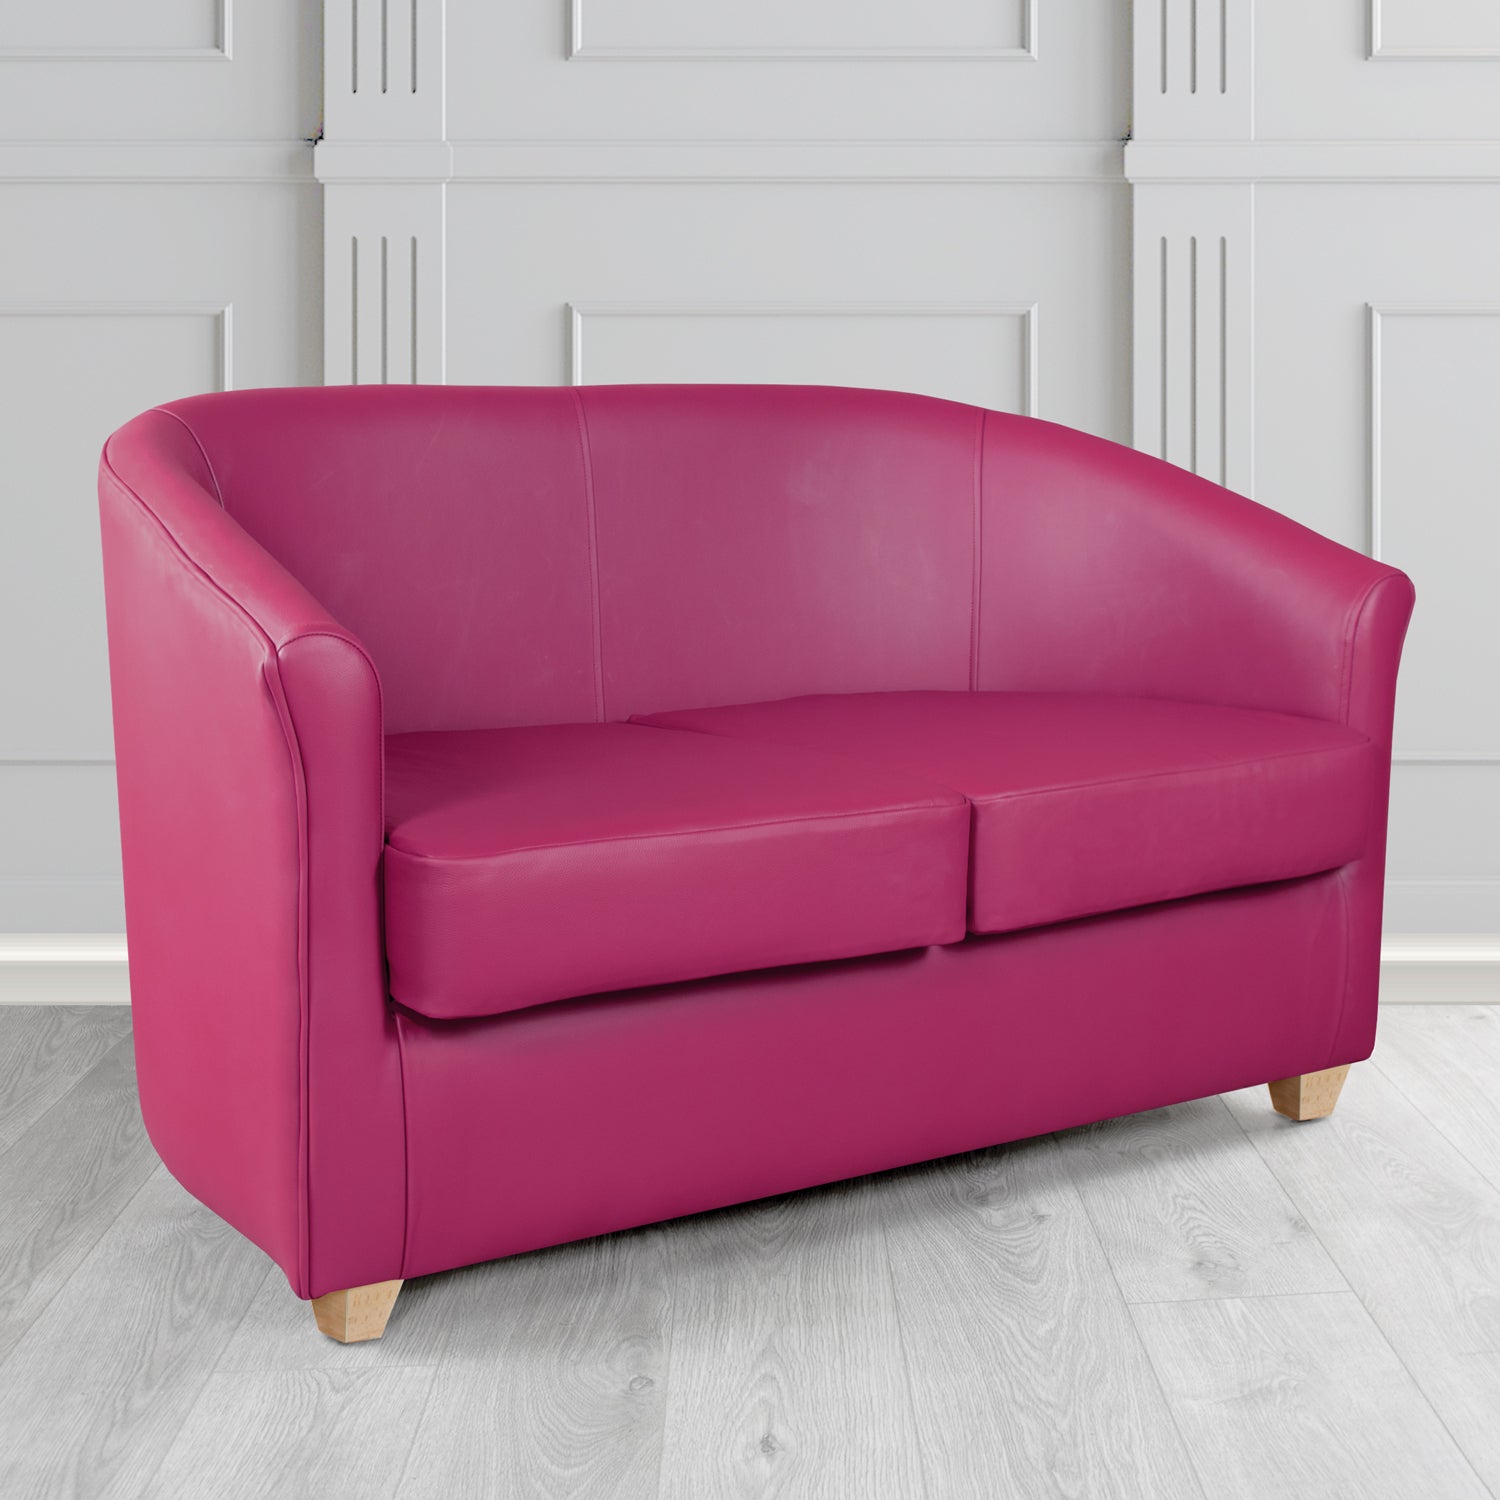 Cannes 2 Seater Tub Sofa in Just Colour Raspberry Crush Crib 5 Faux Leather - The Tub Chair Shop